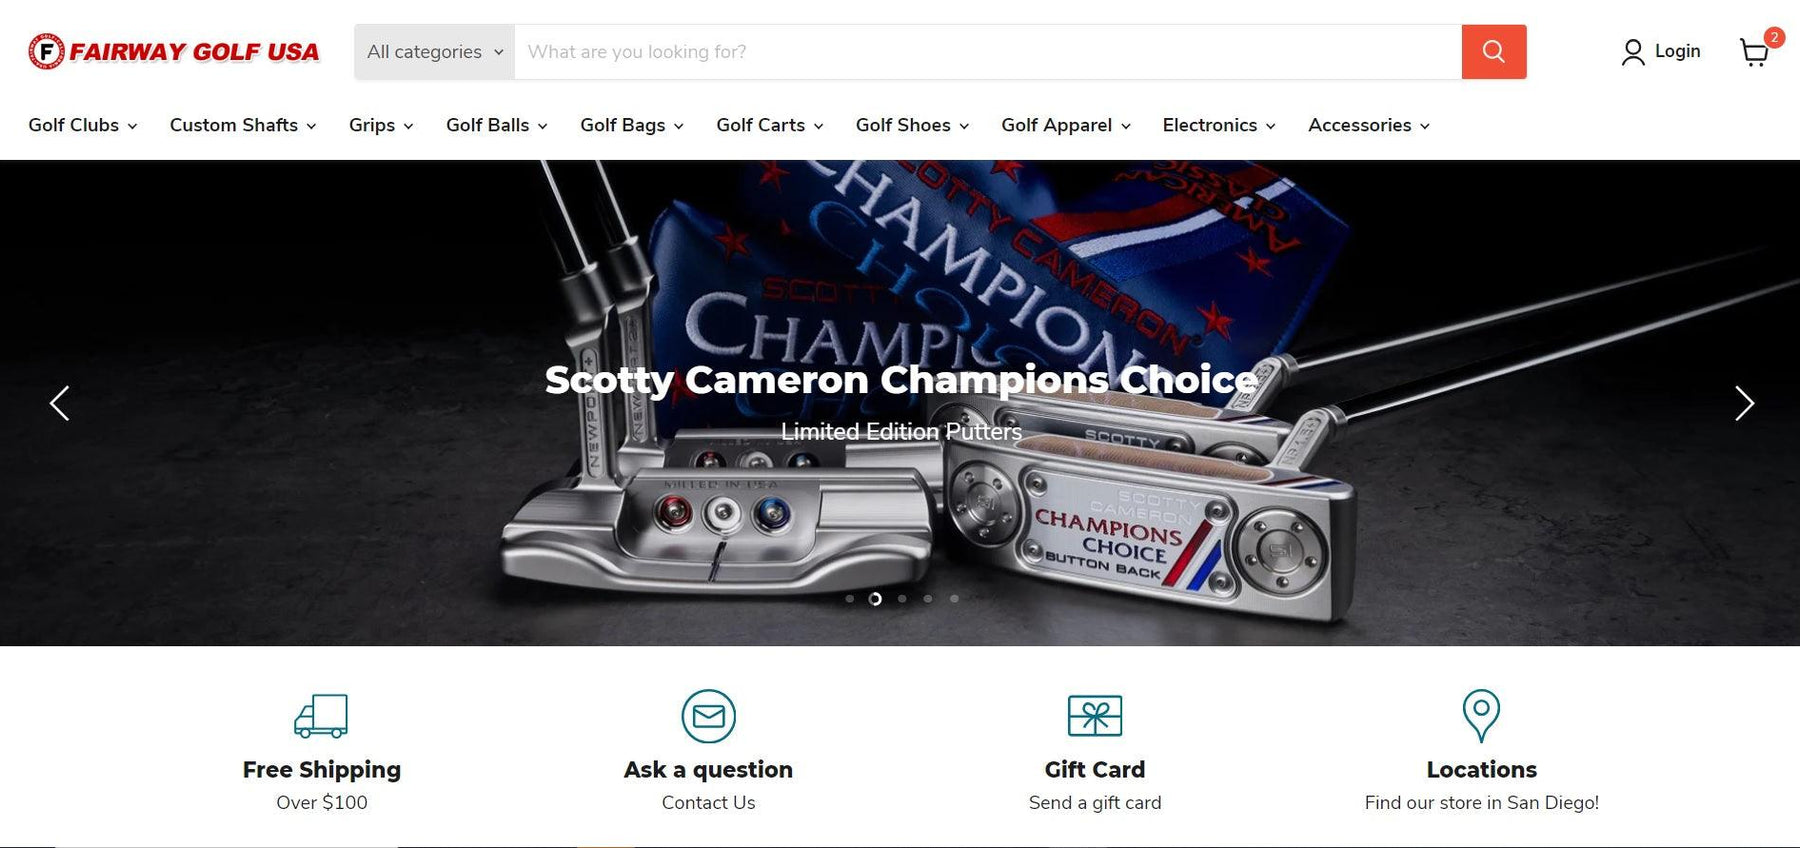 Welcome to our new website! - Fairway Golf